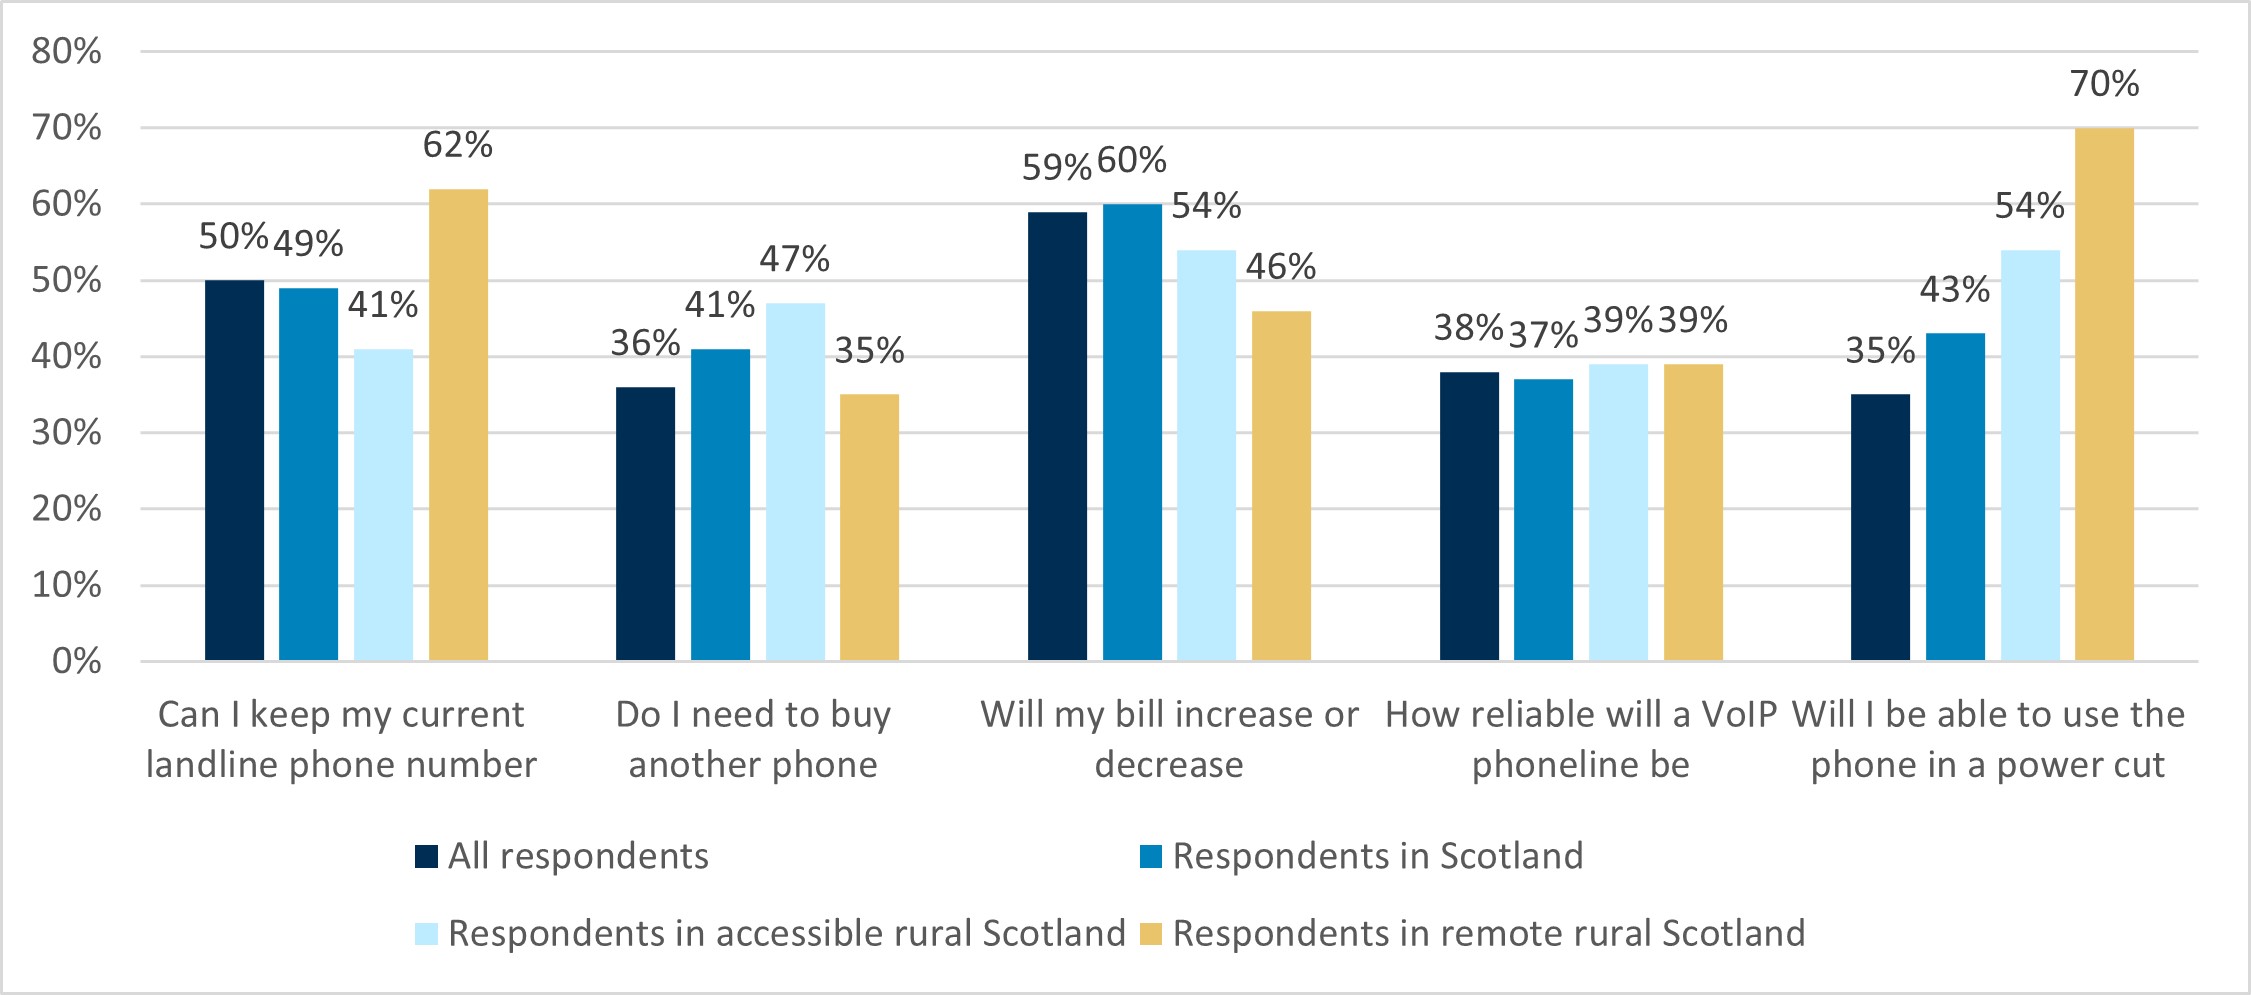 A bar chart showing responses to what the top three most important things respondents would like to know about the new voice over IP (VOIP) services. The chart shows a breakdown for respondents in the UK, Scotland, accessible rural Scotland and remote rural Scotland.